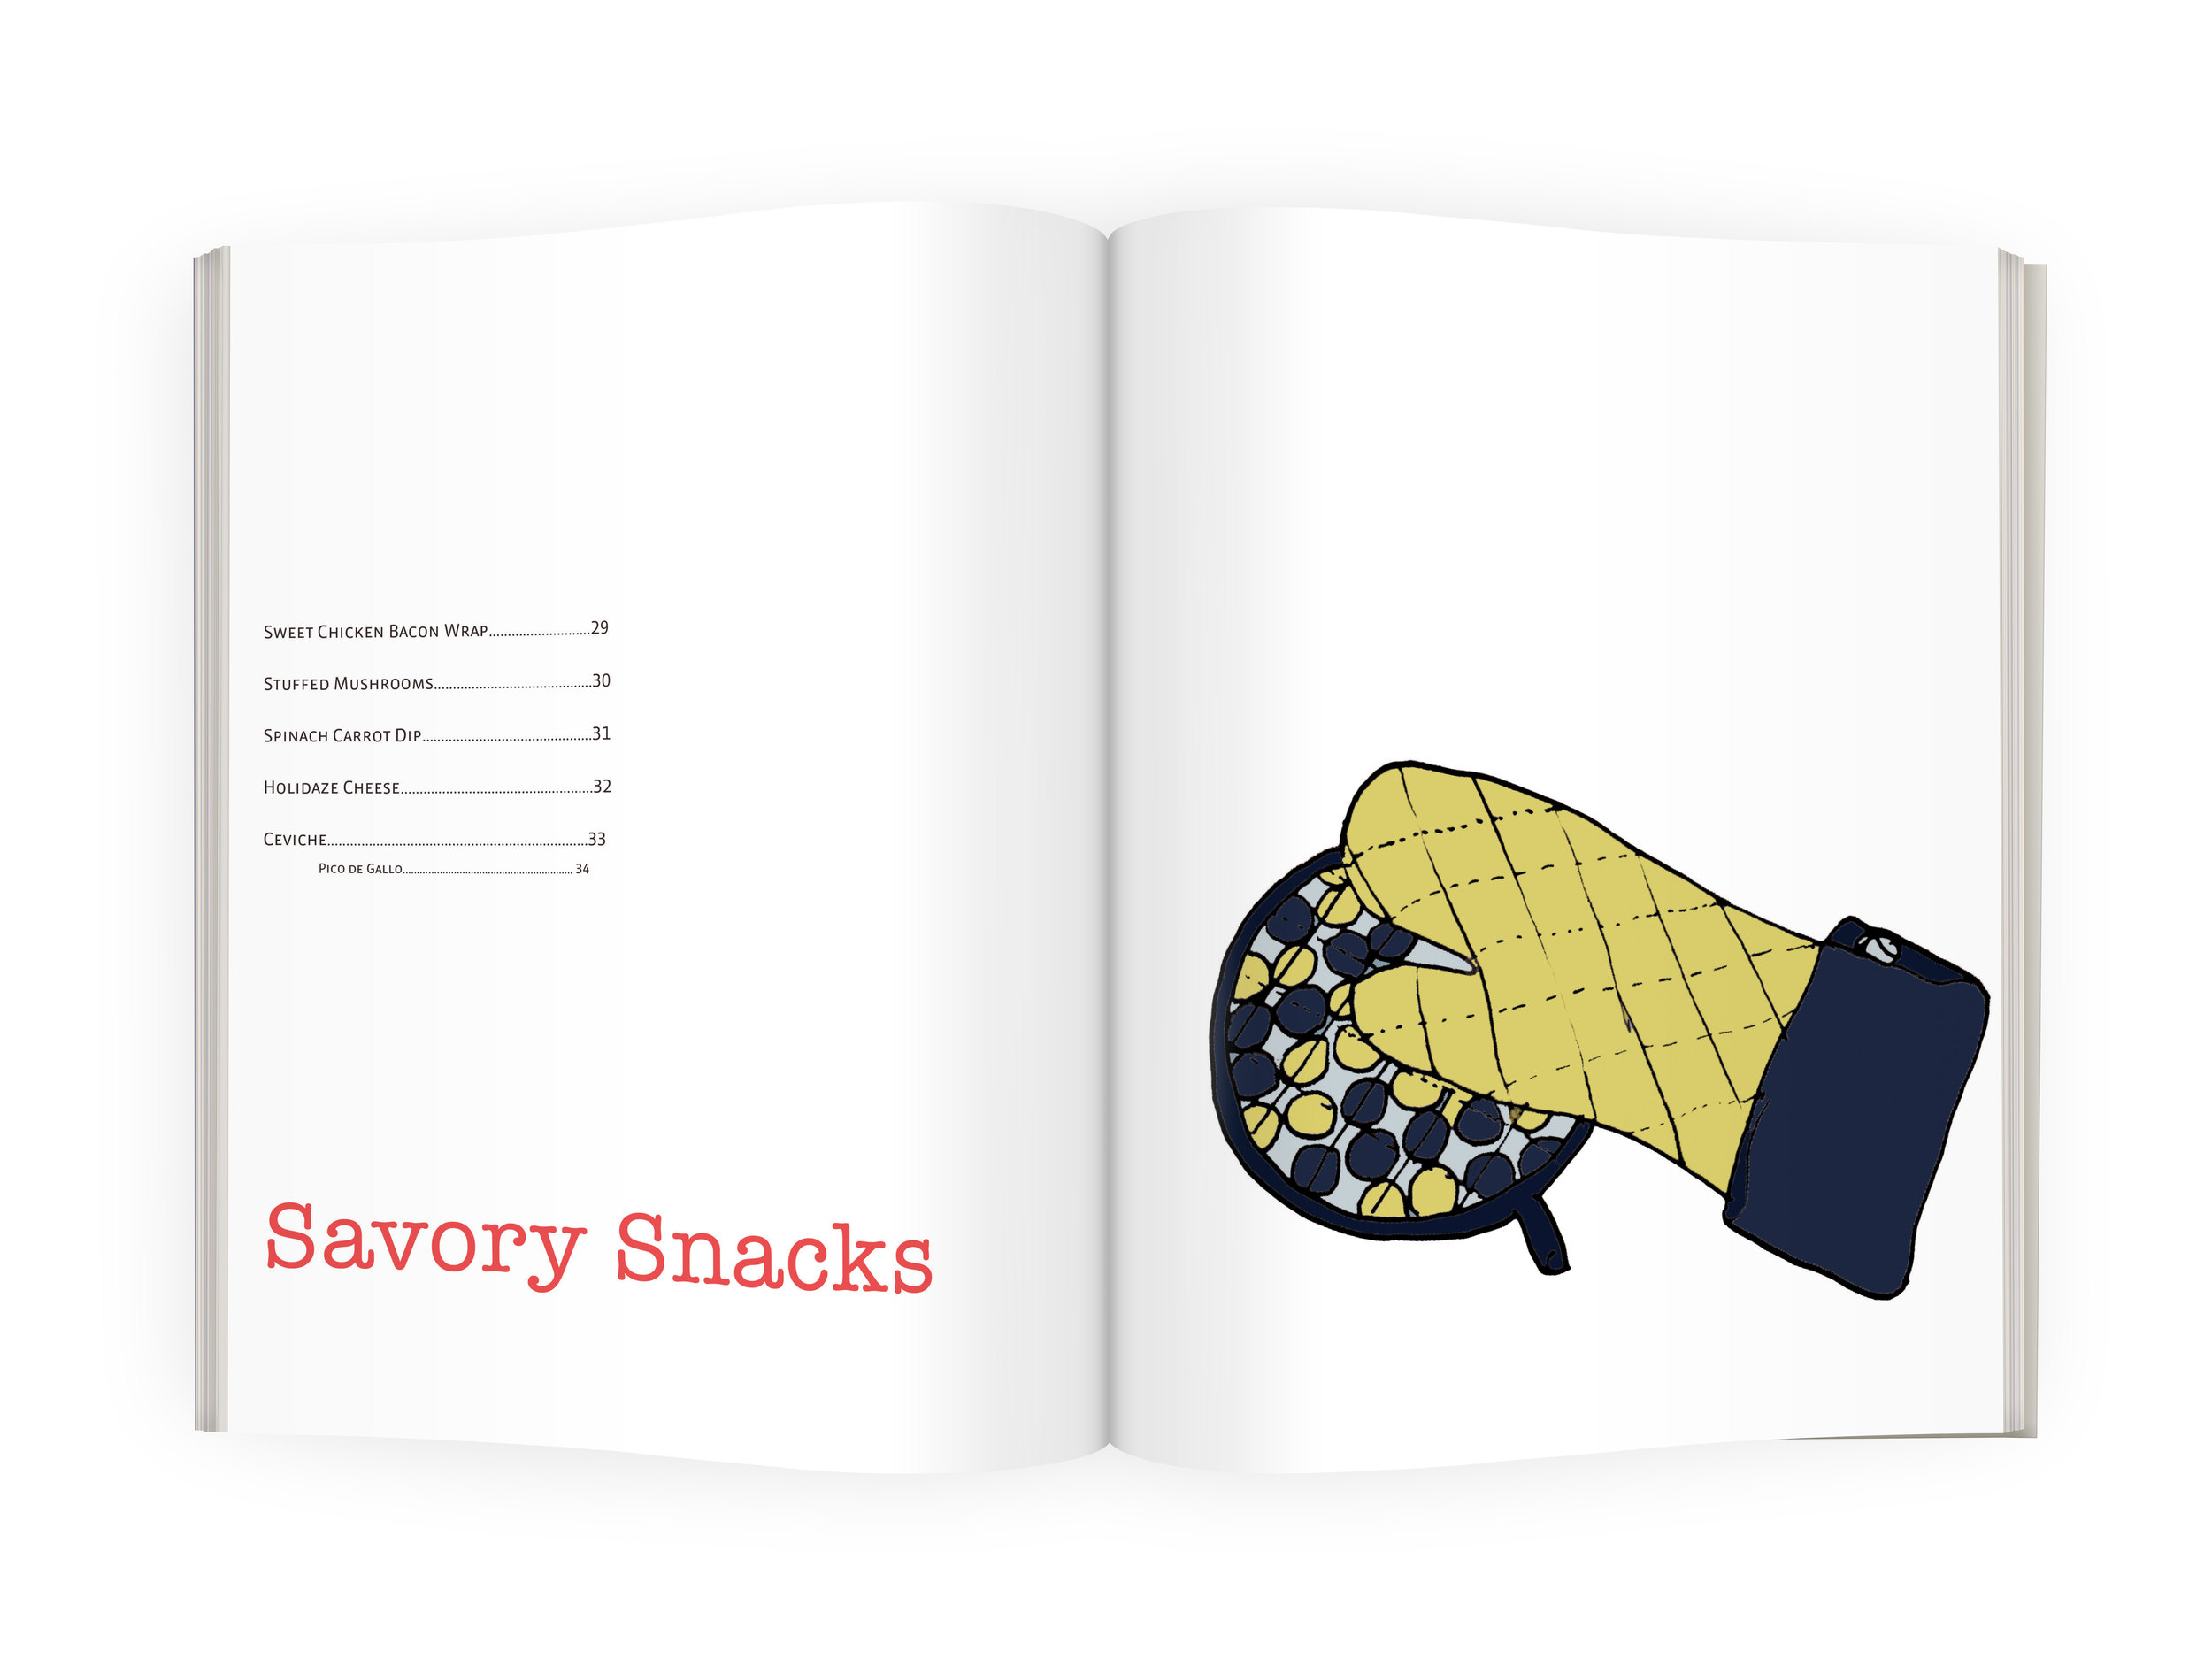 Table of Contents for Savory Snacks